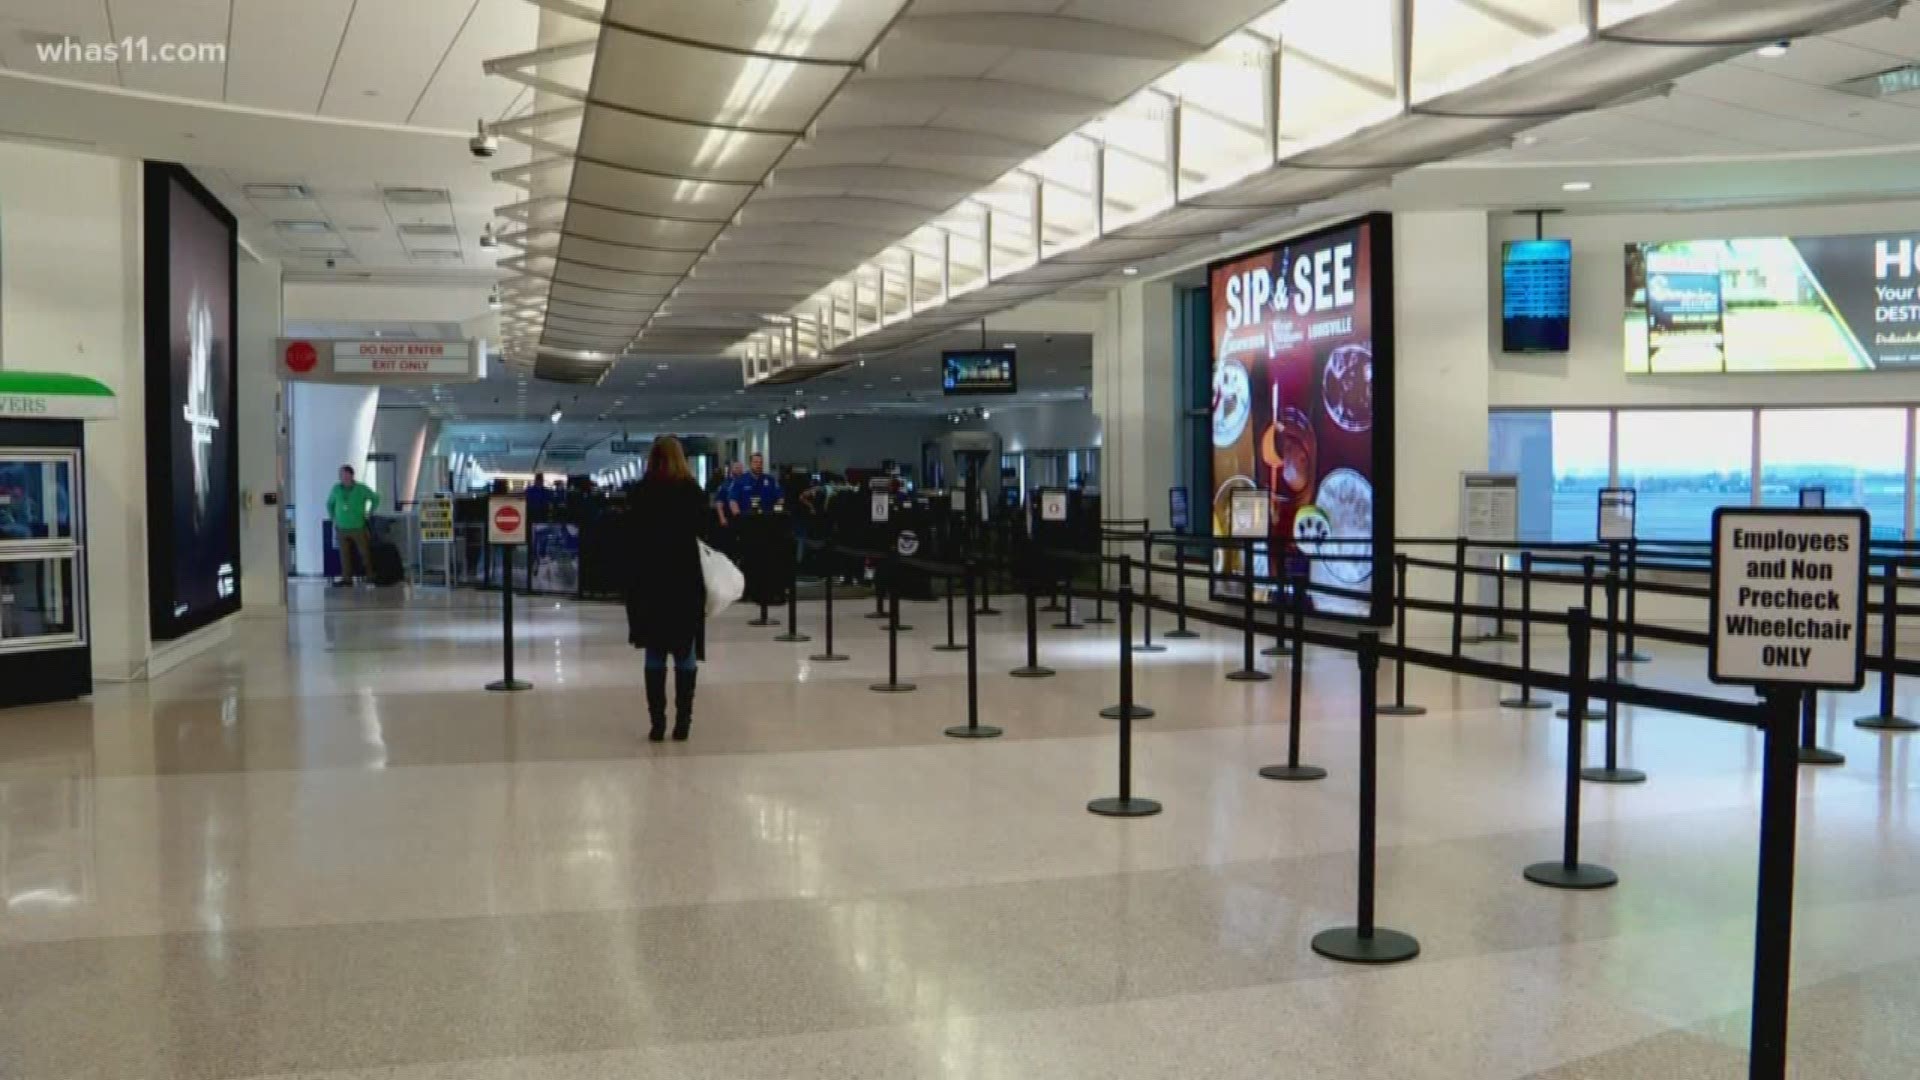 The airport says it broke records during the third quarter that will set them on pace to have its busiest year in the airport's history.